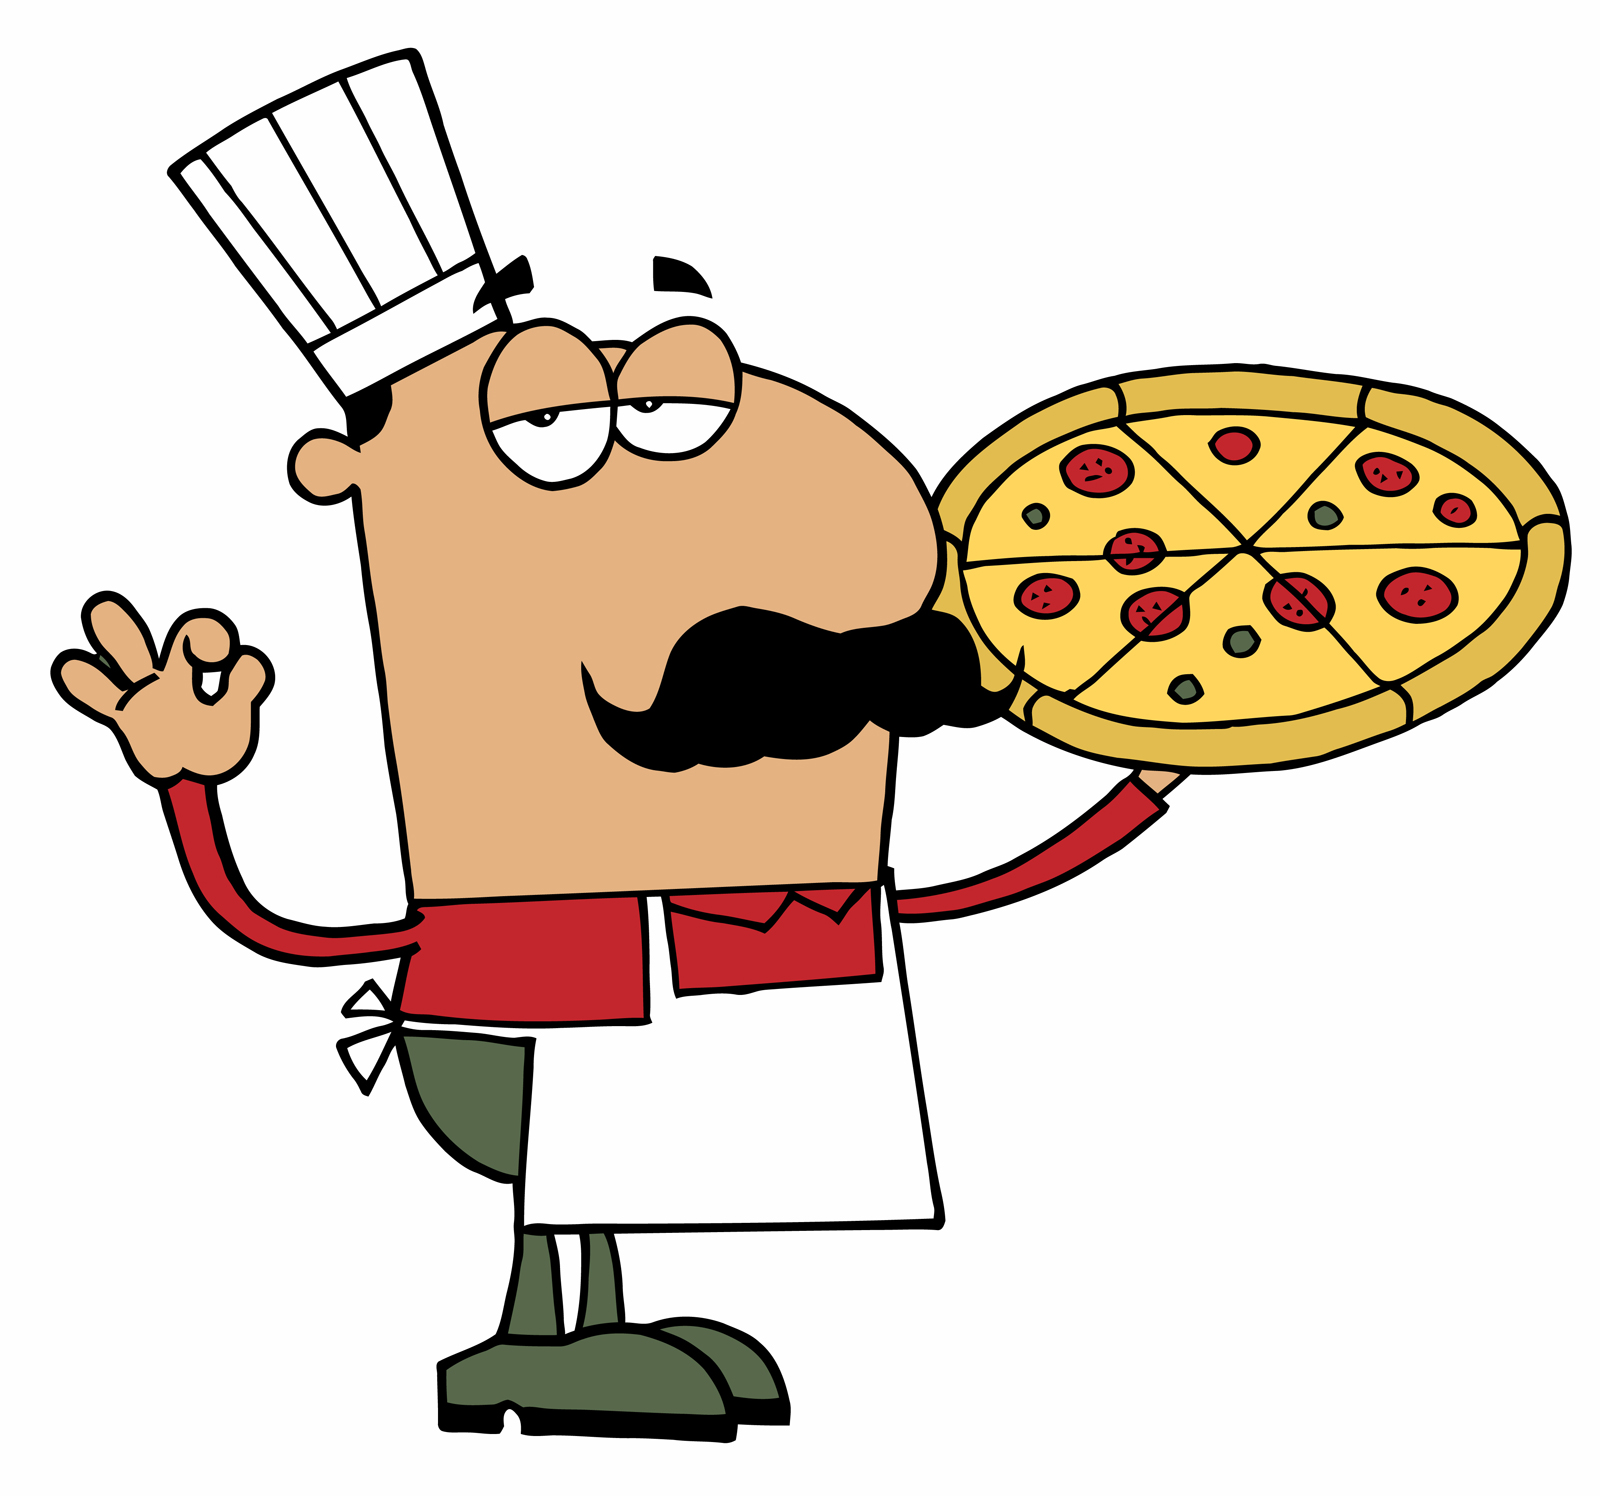 Pizza Pie Cartoon - Free Clipart Images